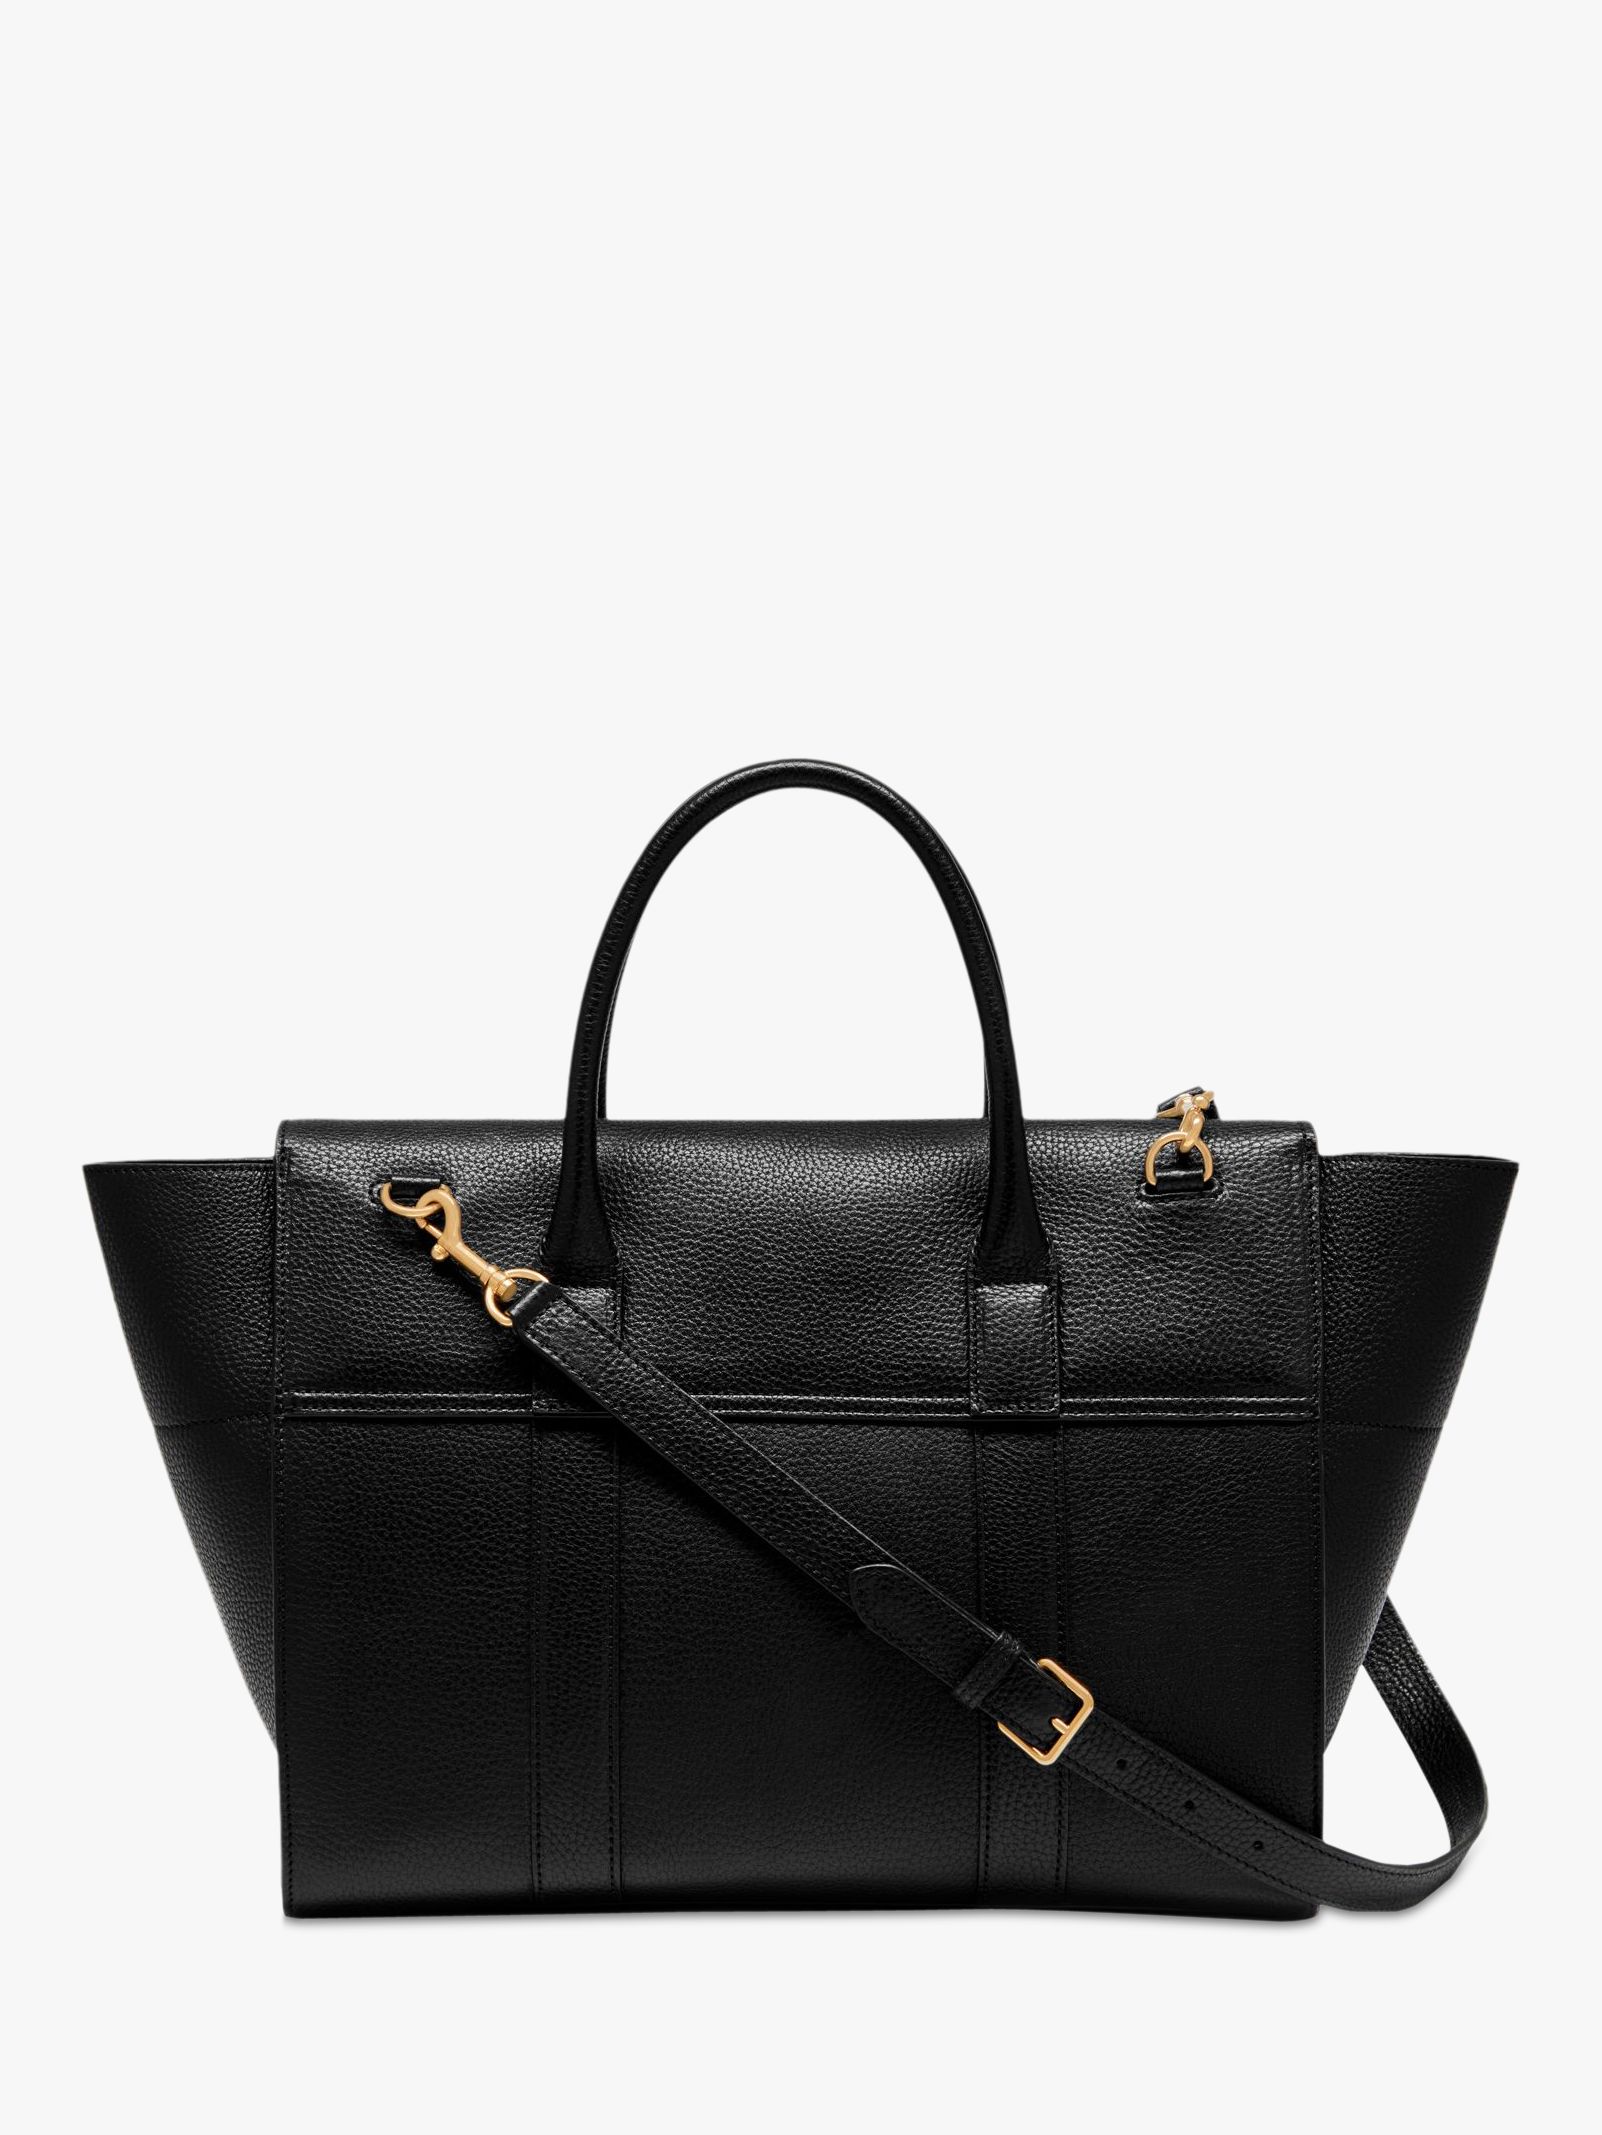 Mulberry Bayswater with Strap Small Classic Grain Leather Bag, Black